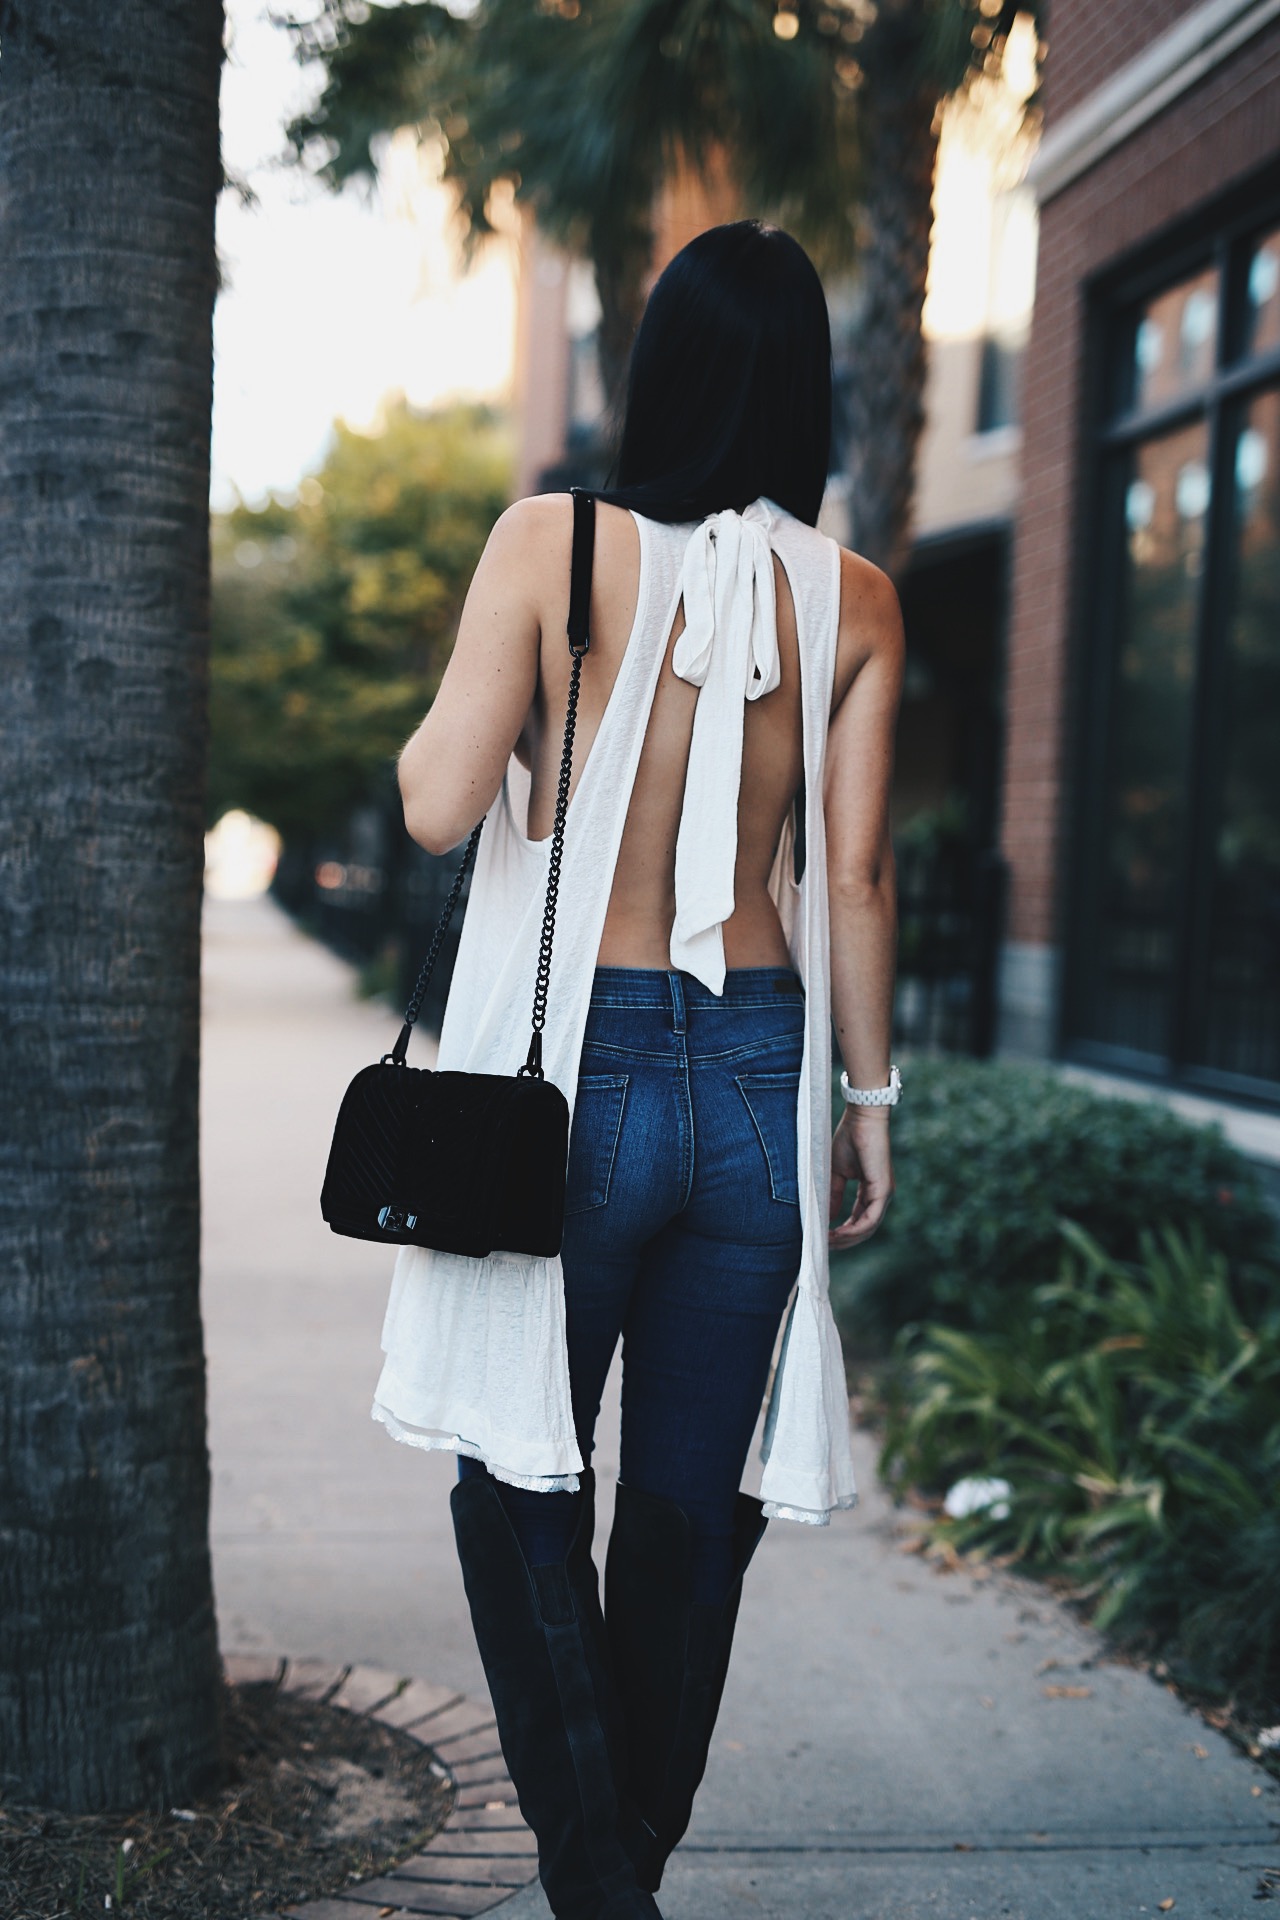 DTKAustin is sharing her favorite white free people top shot while in New Orleans. Ashley is carrying a Rebecca Minkoff Love bag and wearing Vince Camuto OTK Boots. Click to get more info and pics!